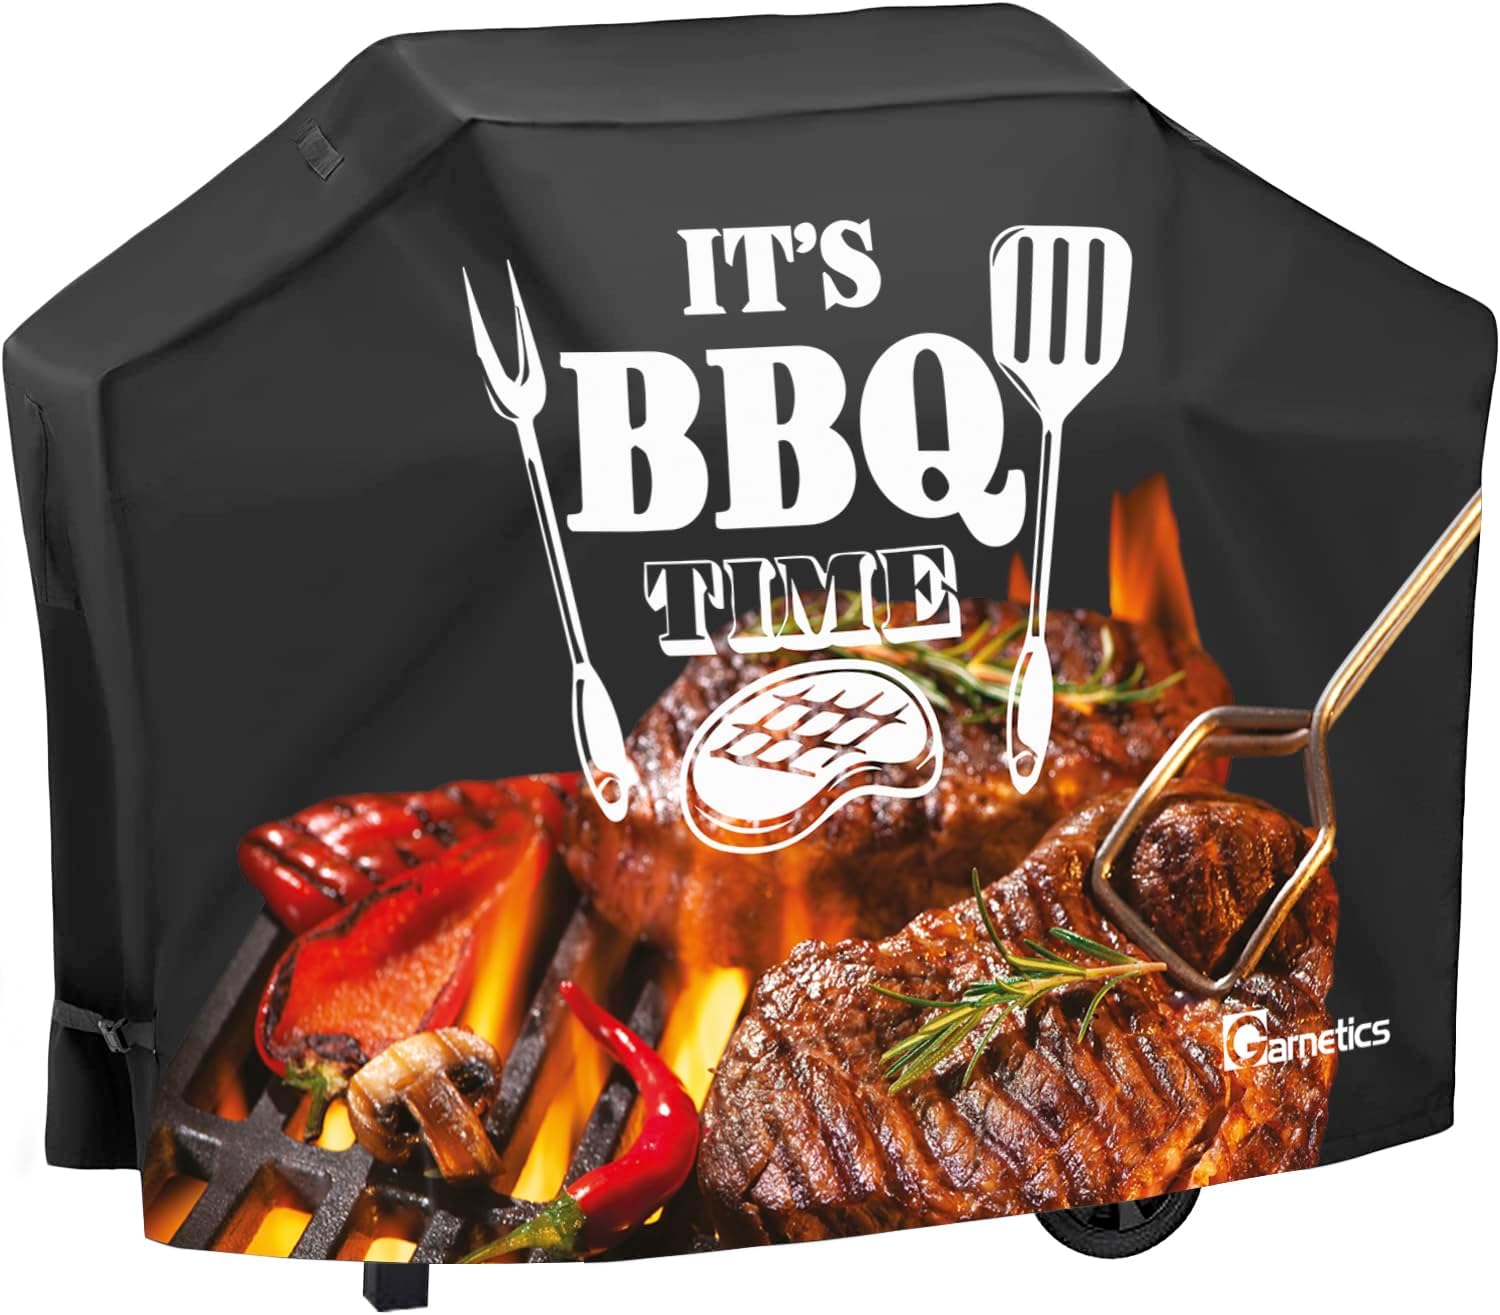 Steak Grill Covers